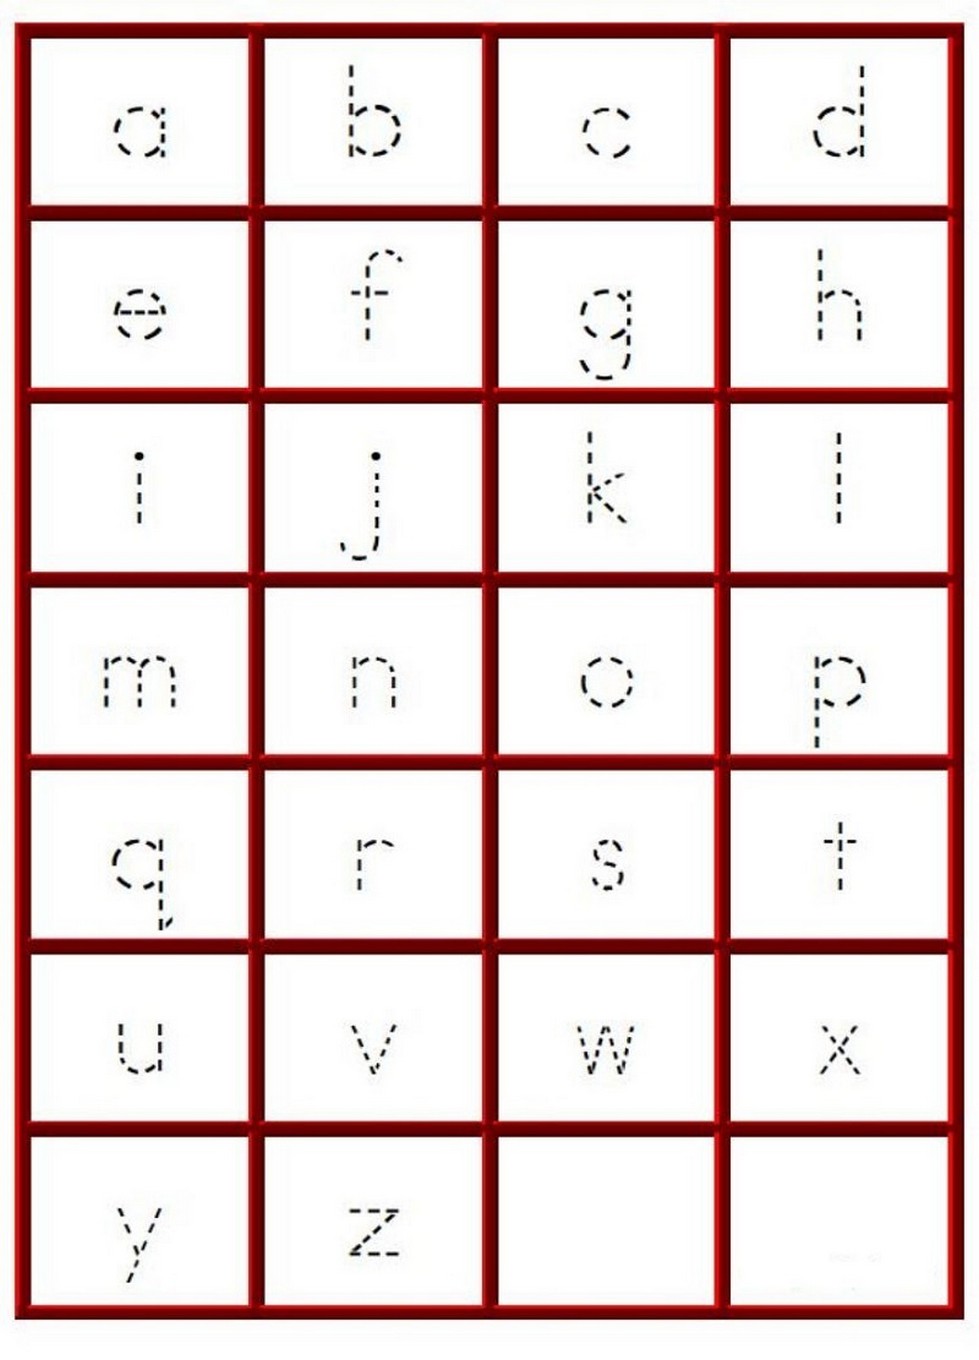 tracing letters a-z worksheets page